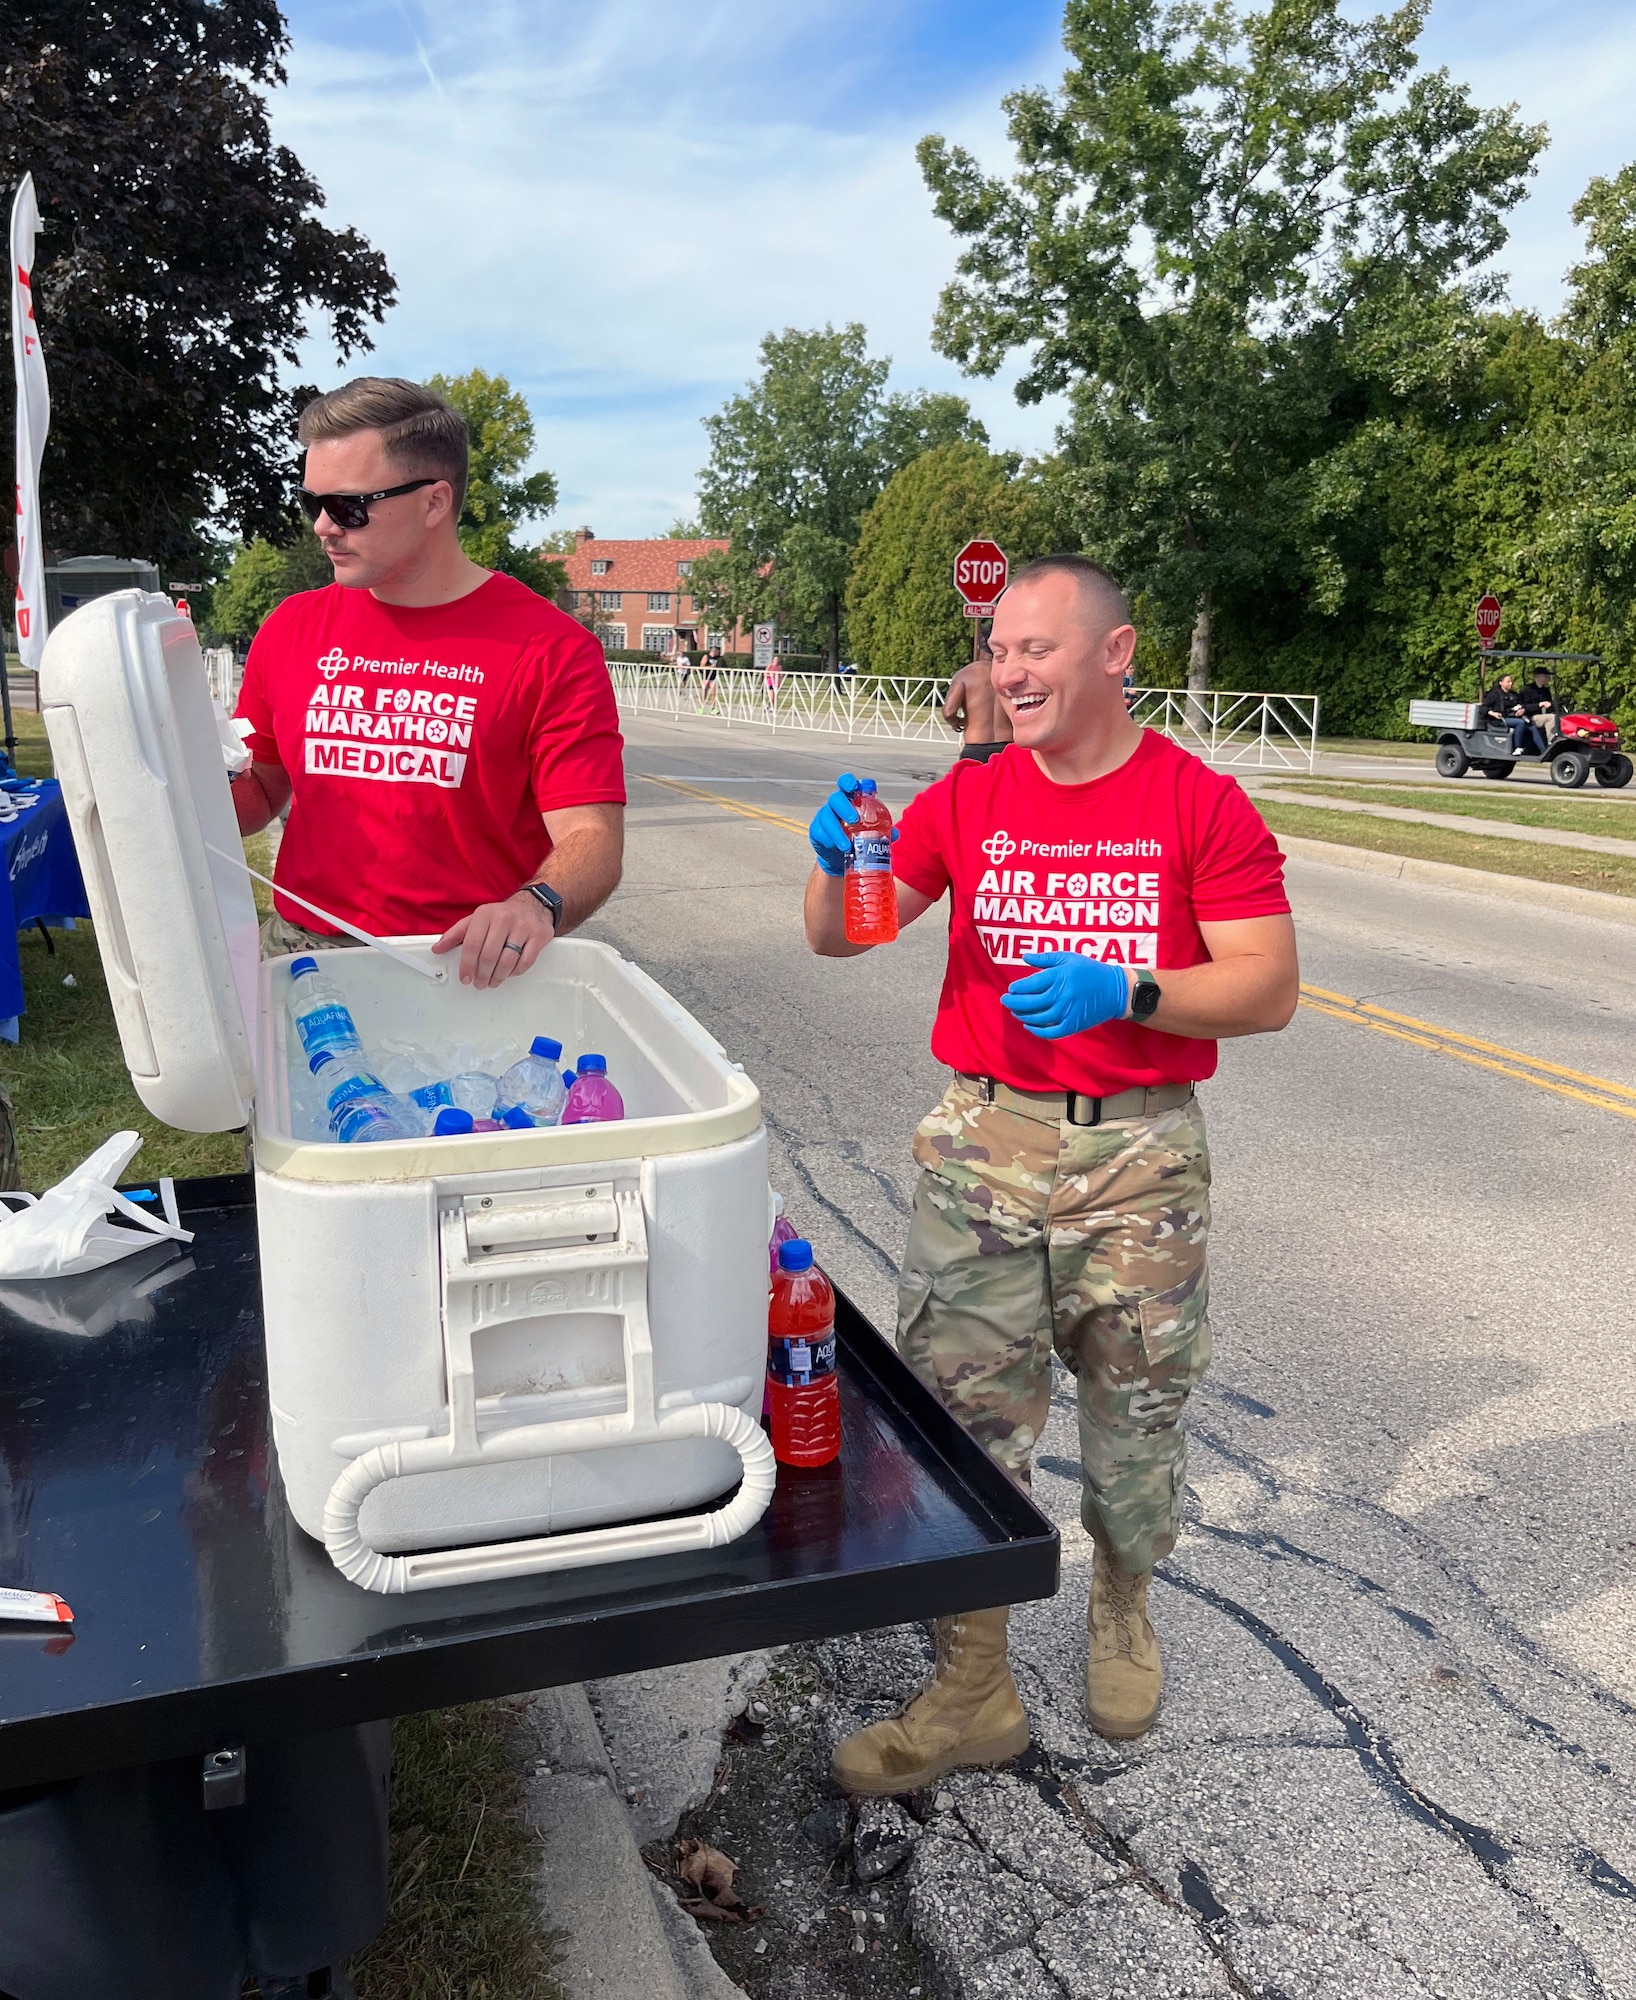 U.S. Air Force 1st Lt. Trevor Moyer, left, and Tech. Sgt. Codee Arthur, 445th Aeromedical Staging Squadron, prepare to hand out electrolyte solution and water to runners of the full marathon in Medical Tent L between mile marker 17 and 18 during the Air Force Marathon at Wright-Patterson Air Force Base Ohio, Sept. 16, 2023. More than 8,000 runners competed in the marathon which included a half marathon, 10K run, 5K run and more in addition to the full marathon. (Courtesy photo)